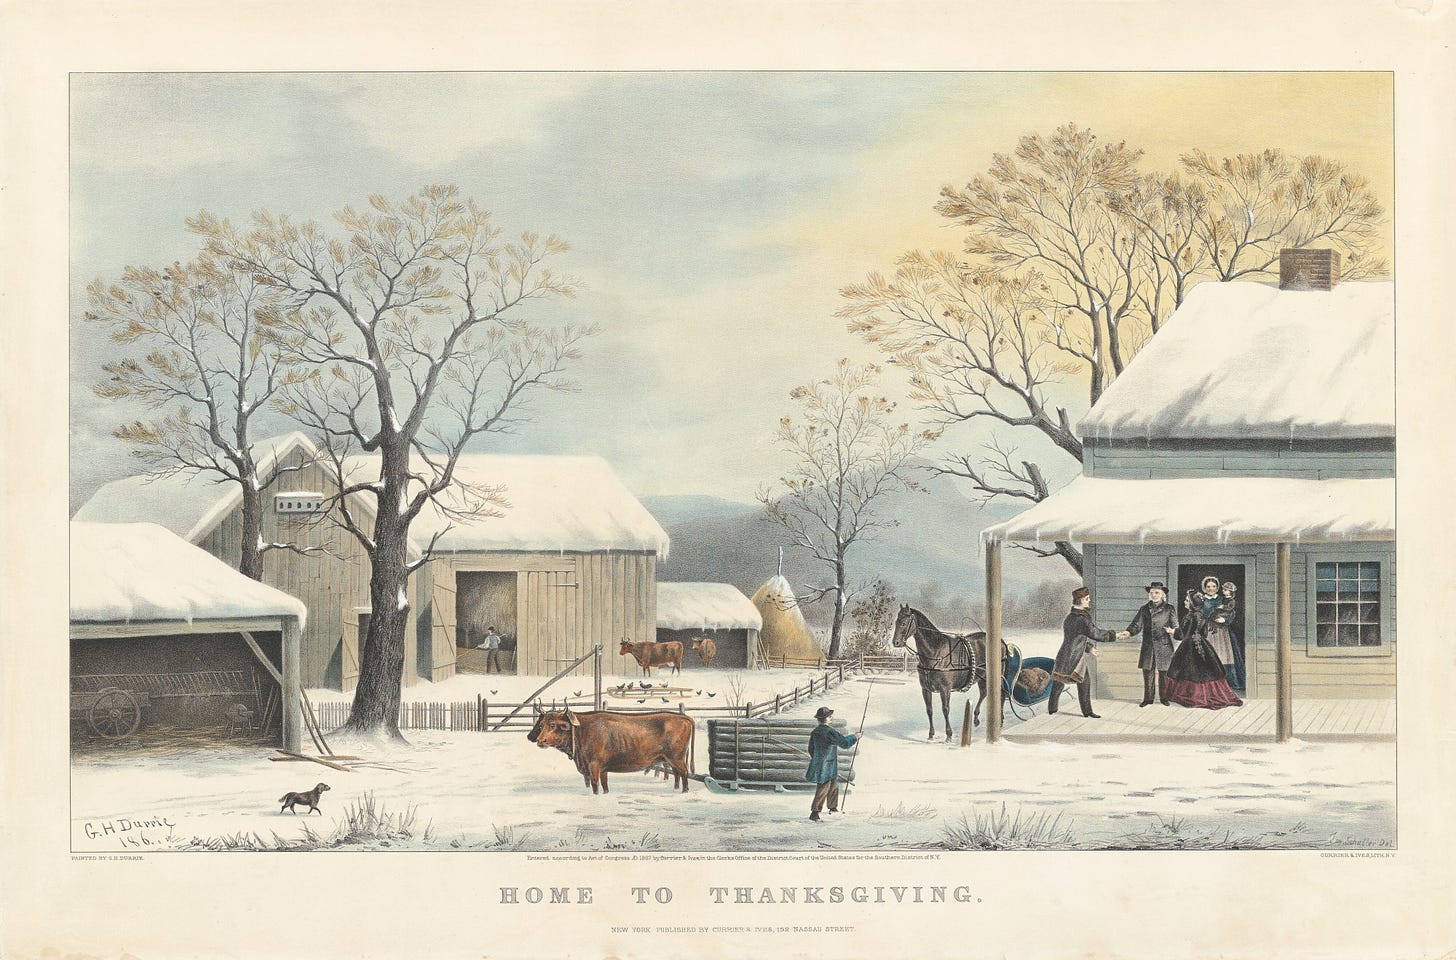 A painting of a winter scene. It's the nineteenth century and visitors are arriving at a farmhouse. There is snow everywhere, oxen pulling a sled.